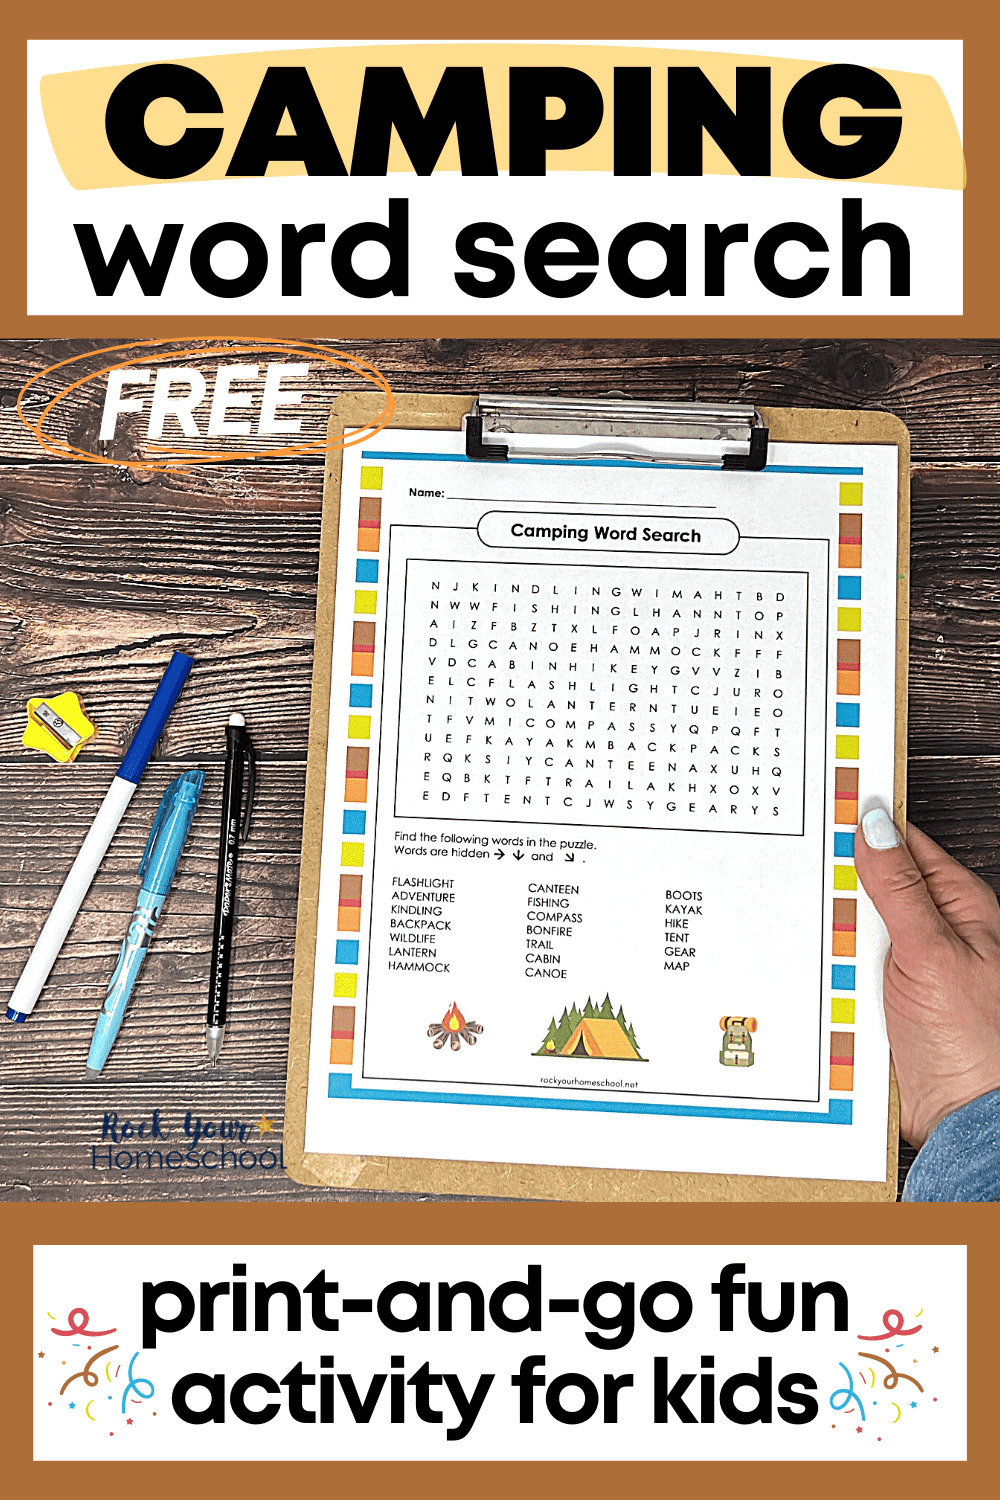 Camping Word Search for a Cool Activity for Kids (Free Printable)